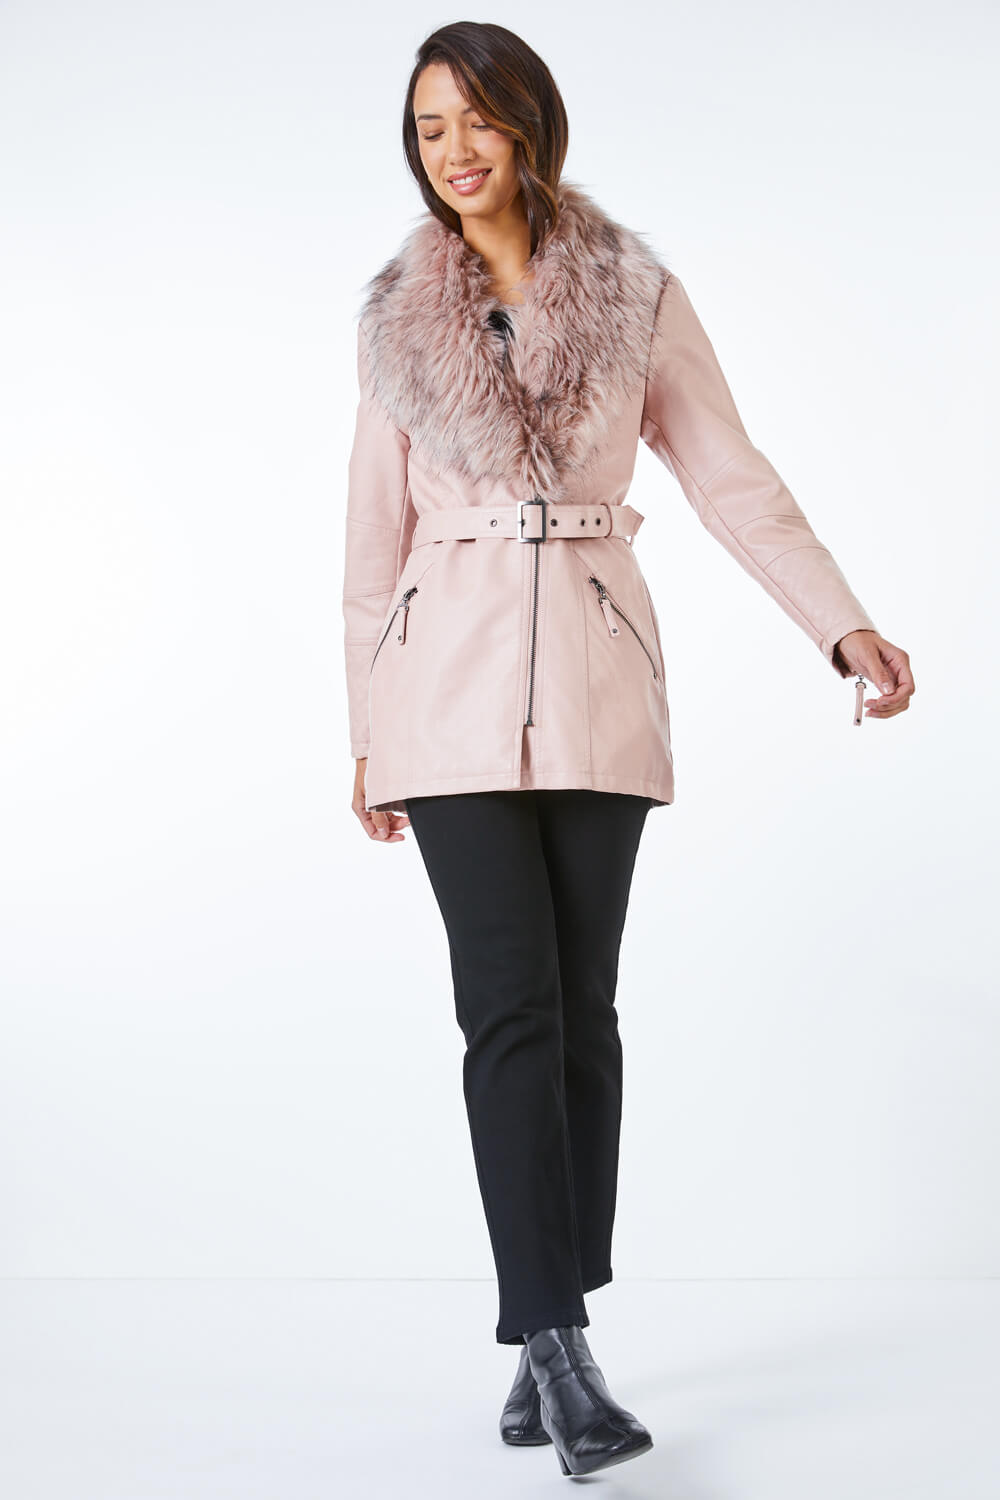 PINK Longline Faux Leather Belted Coat, Image 4 of 5